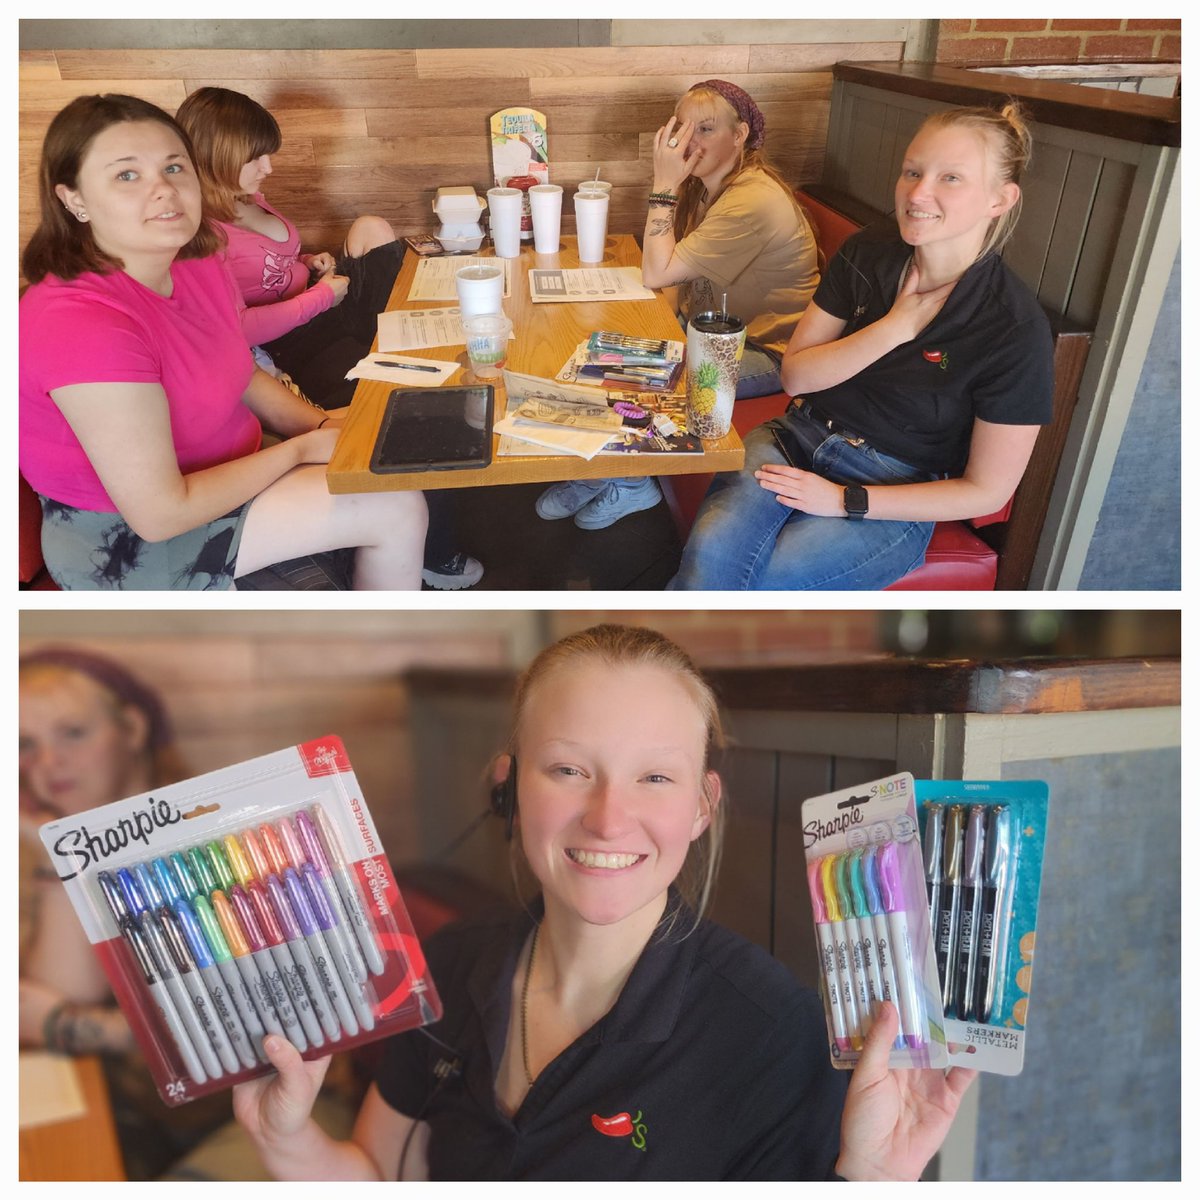 A little 🐦 told me my sister restaurant hadn't had time to get Sharpies, so time for a Special Delivery!!!! Walked into a VFD/orientation! Welcome to the team, Chilihead babies!!!🌶️👶
#wewintogether #chilislove @CoachHebert11